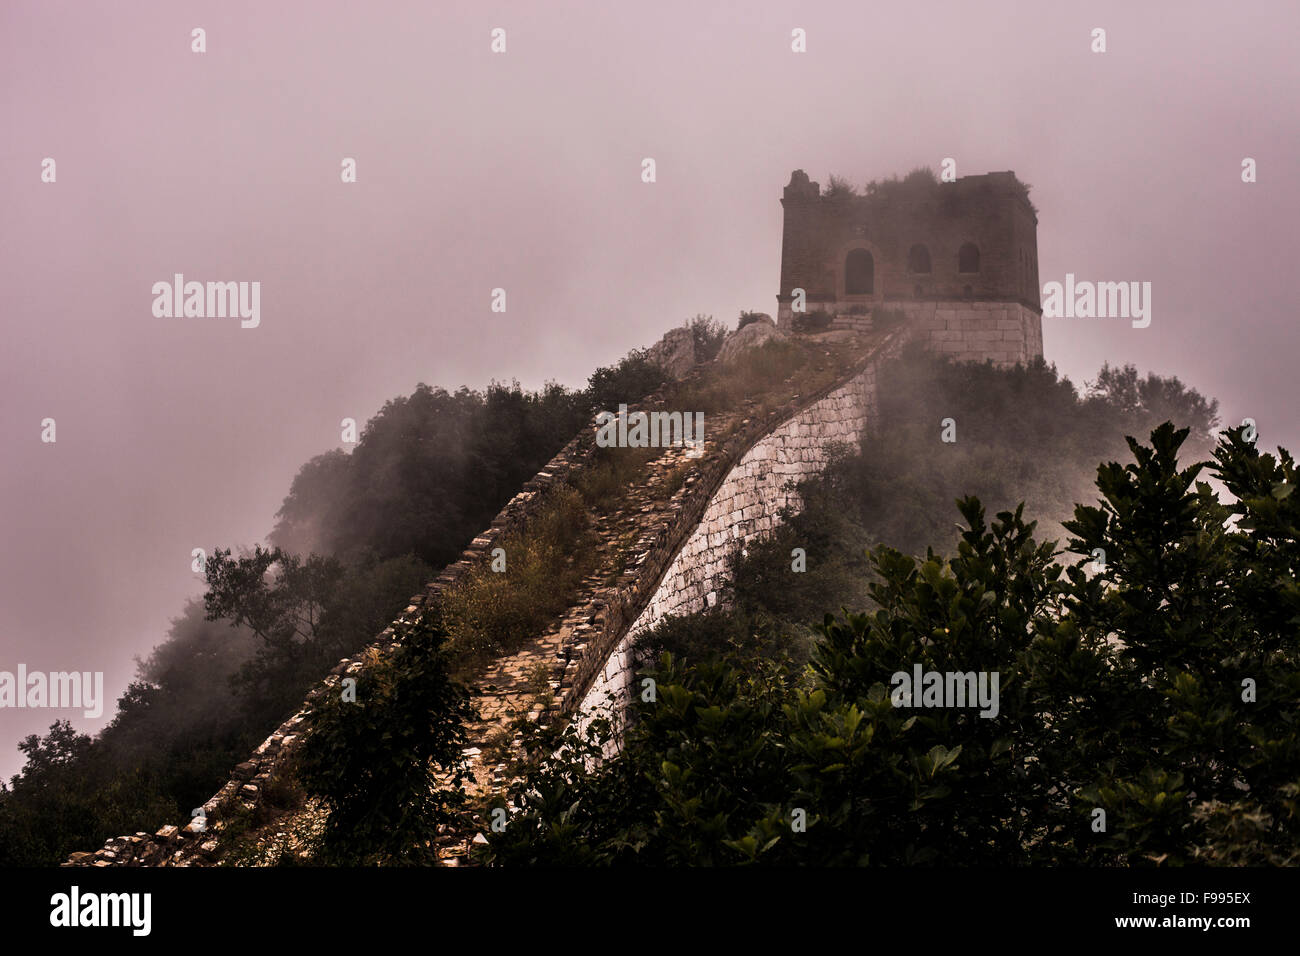 Mountains and the Great Wall of China covered in mist and clouds Stock Photo